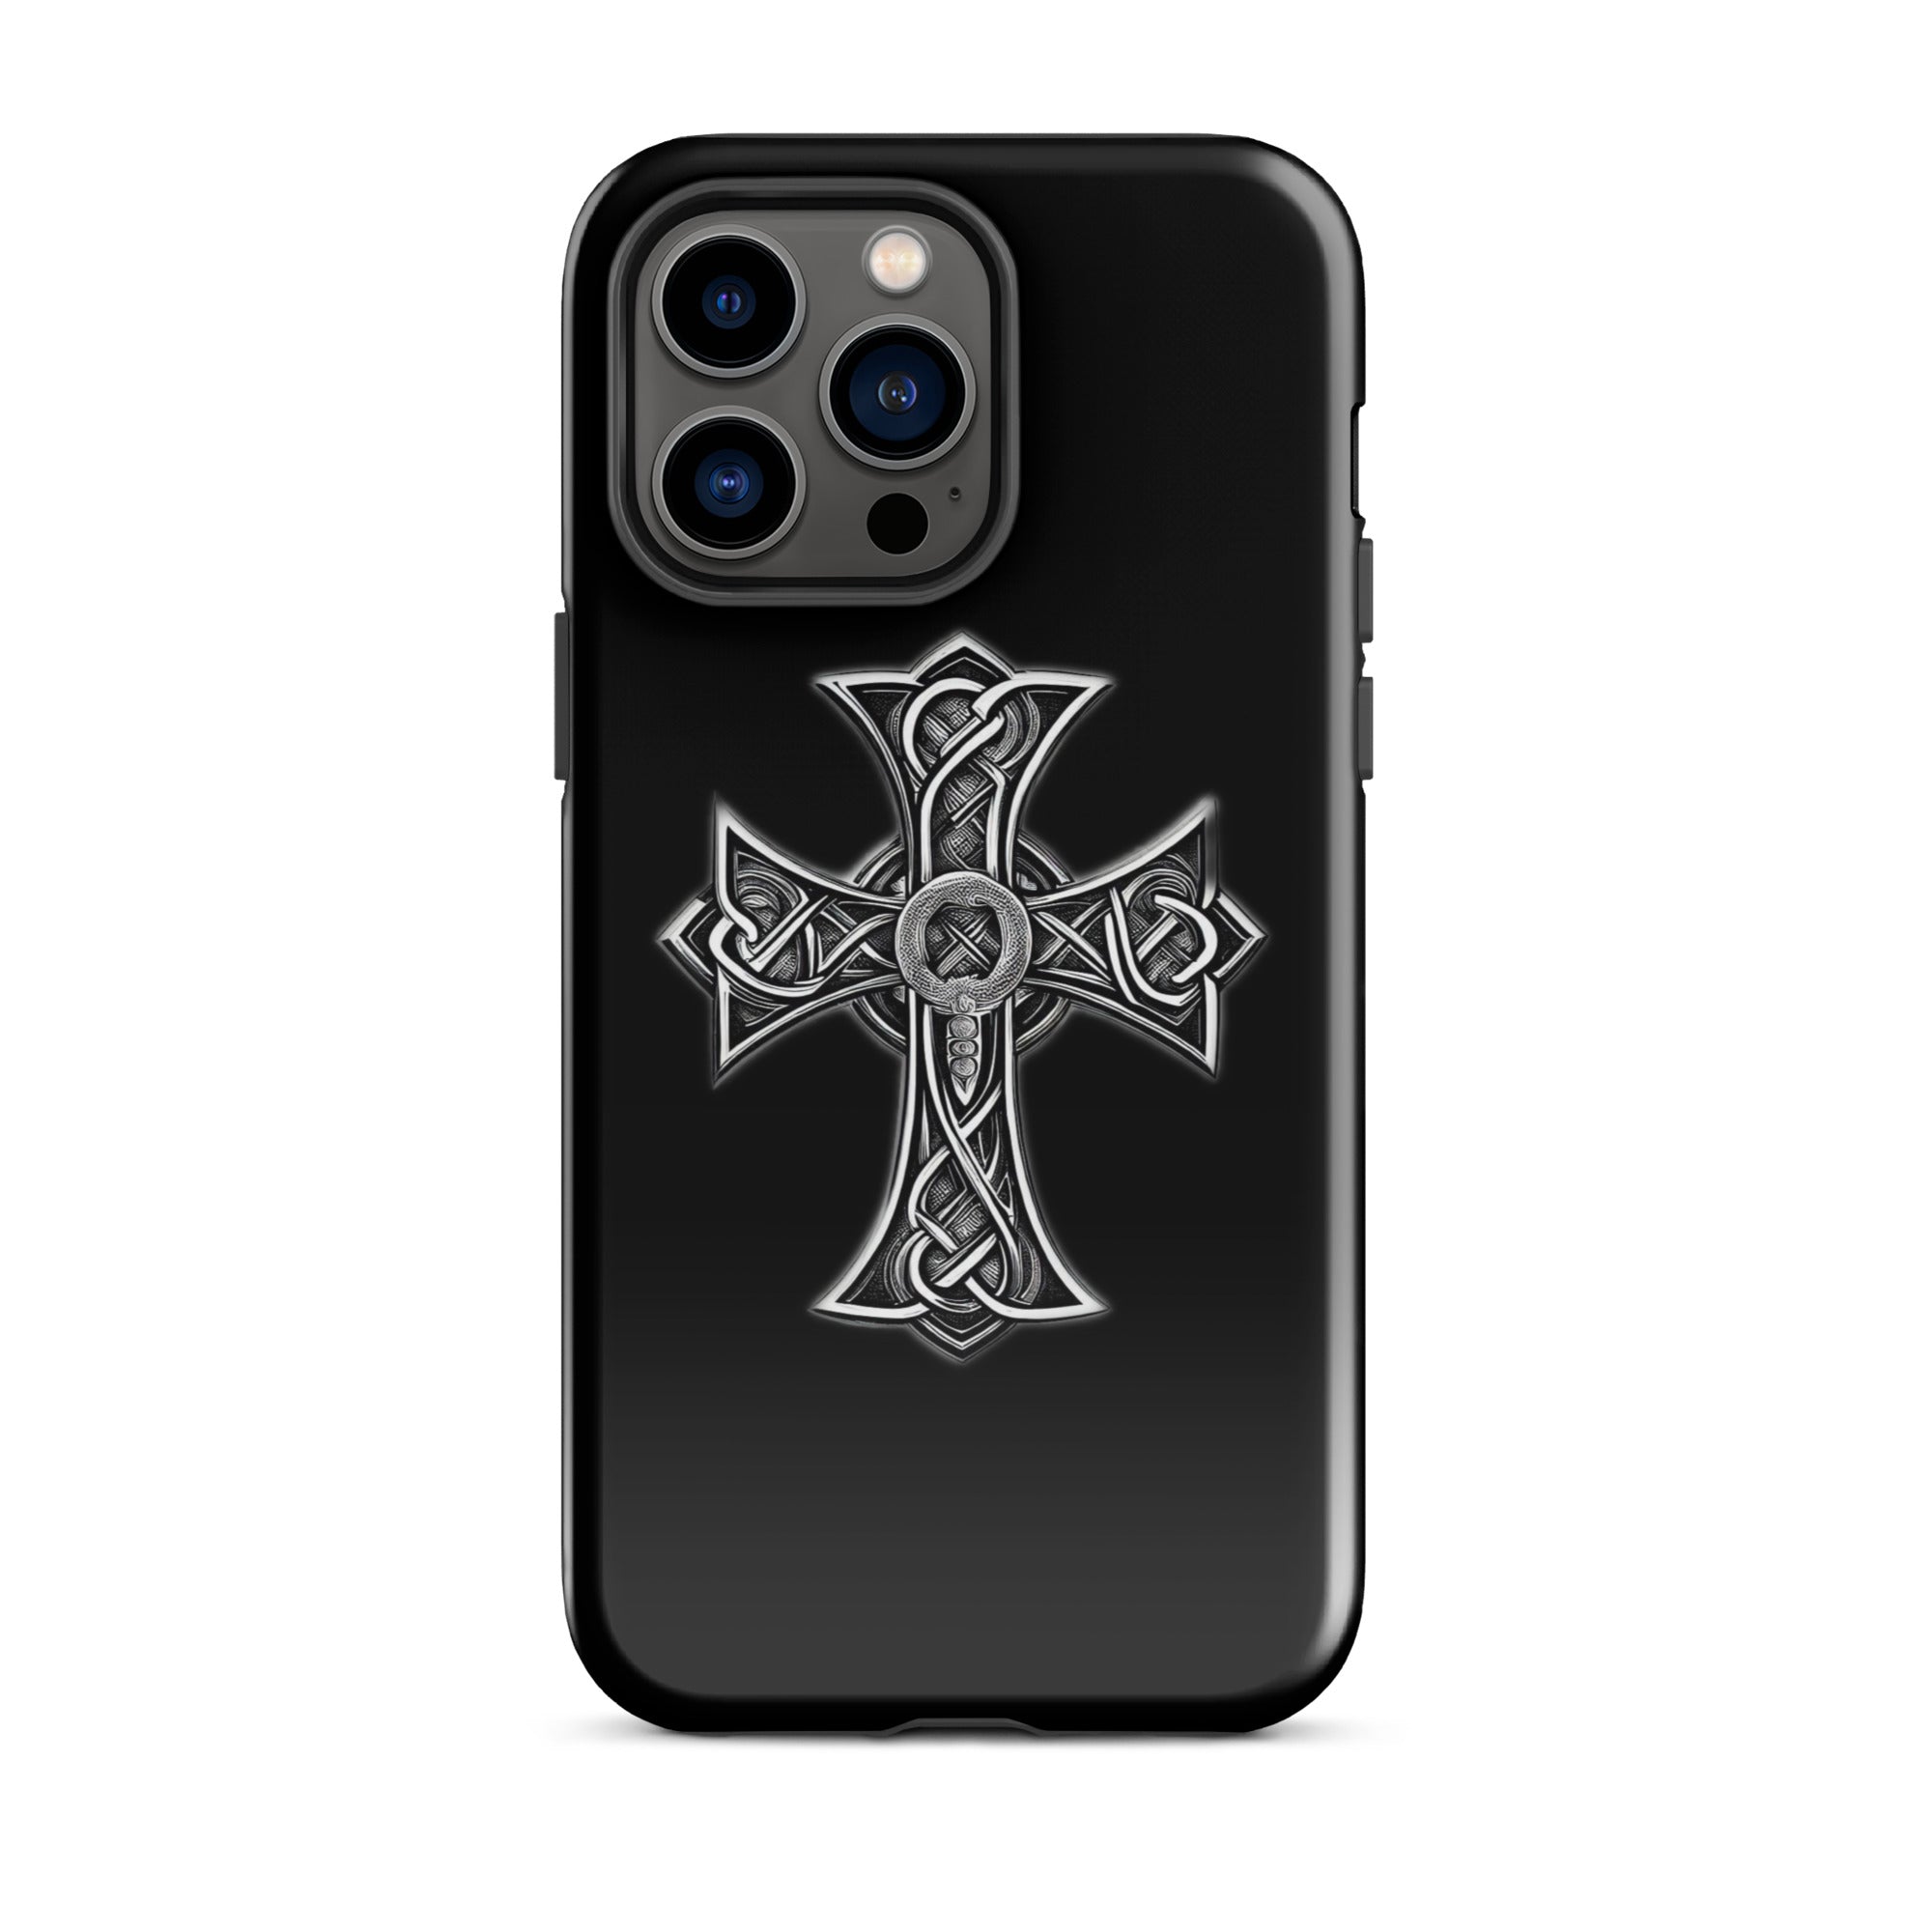 tough-case-for-iphone-glossy-iphone-14-pro-max-front-6563851a37ede.jpg